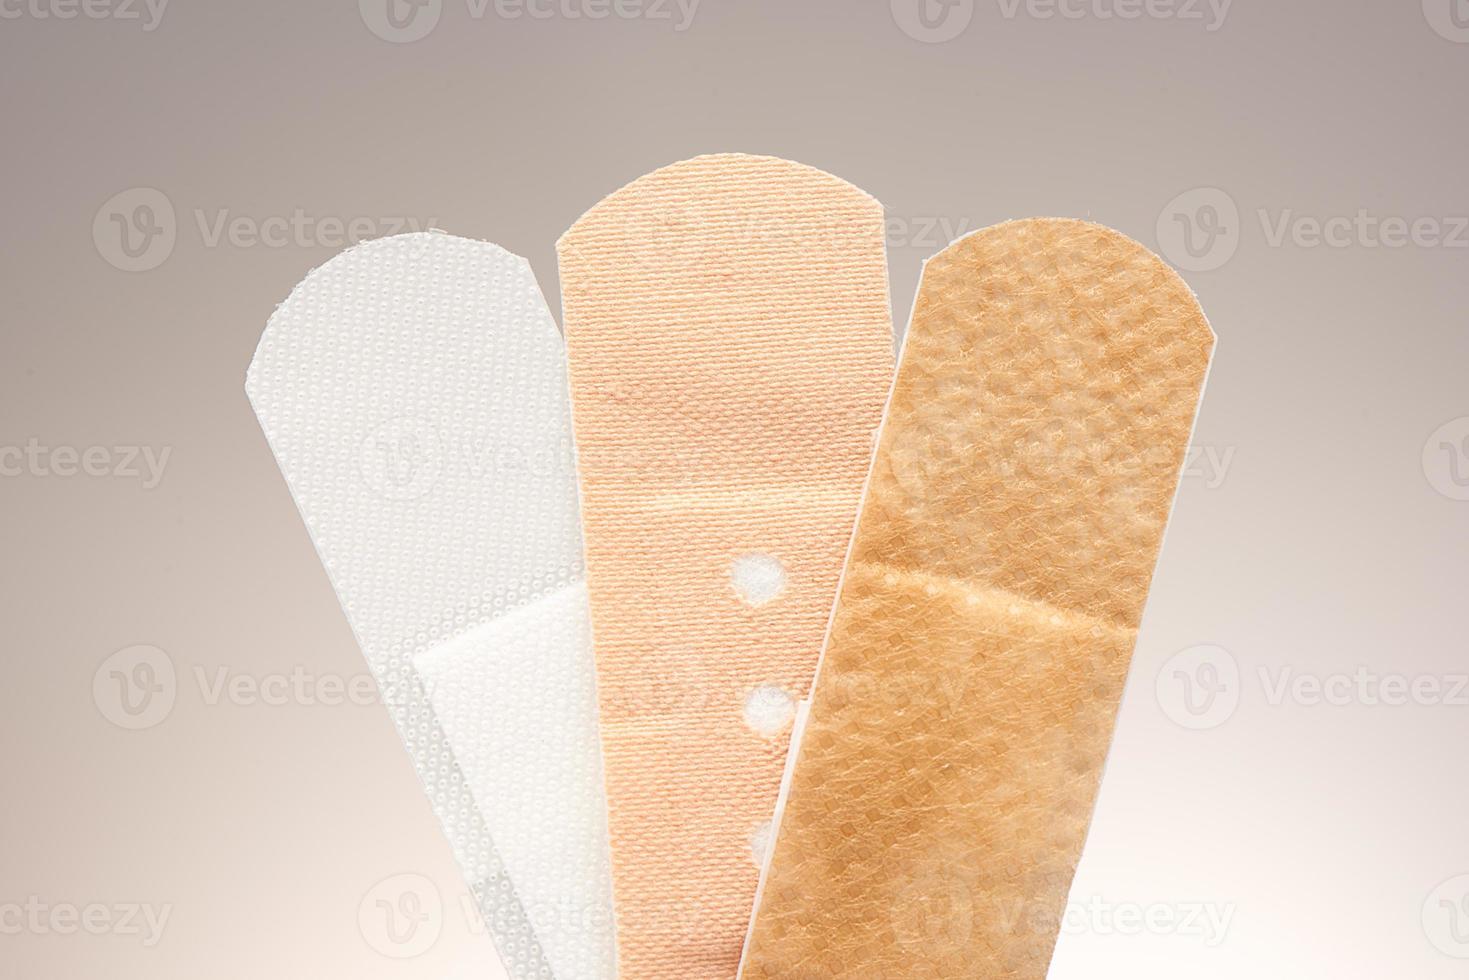 Set of three medical adhesive plasters with different purposes photo